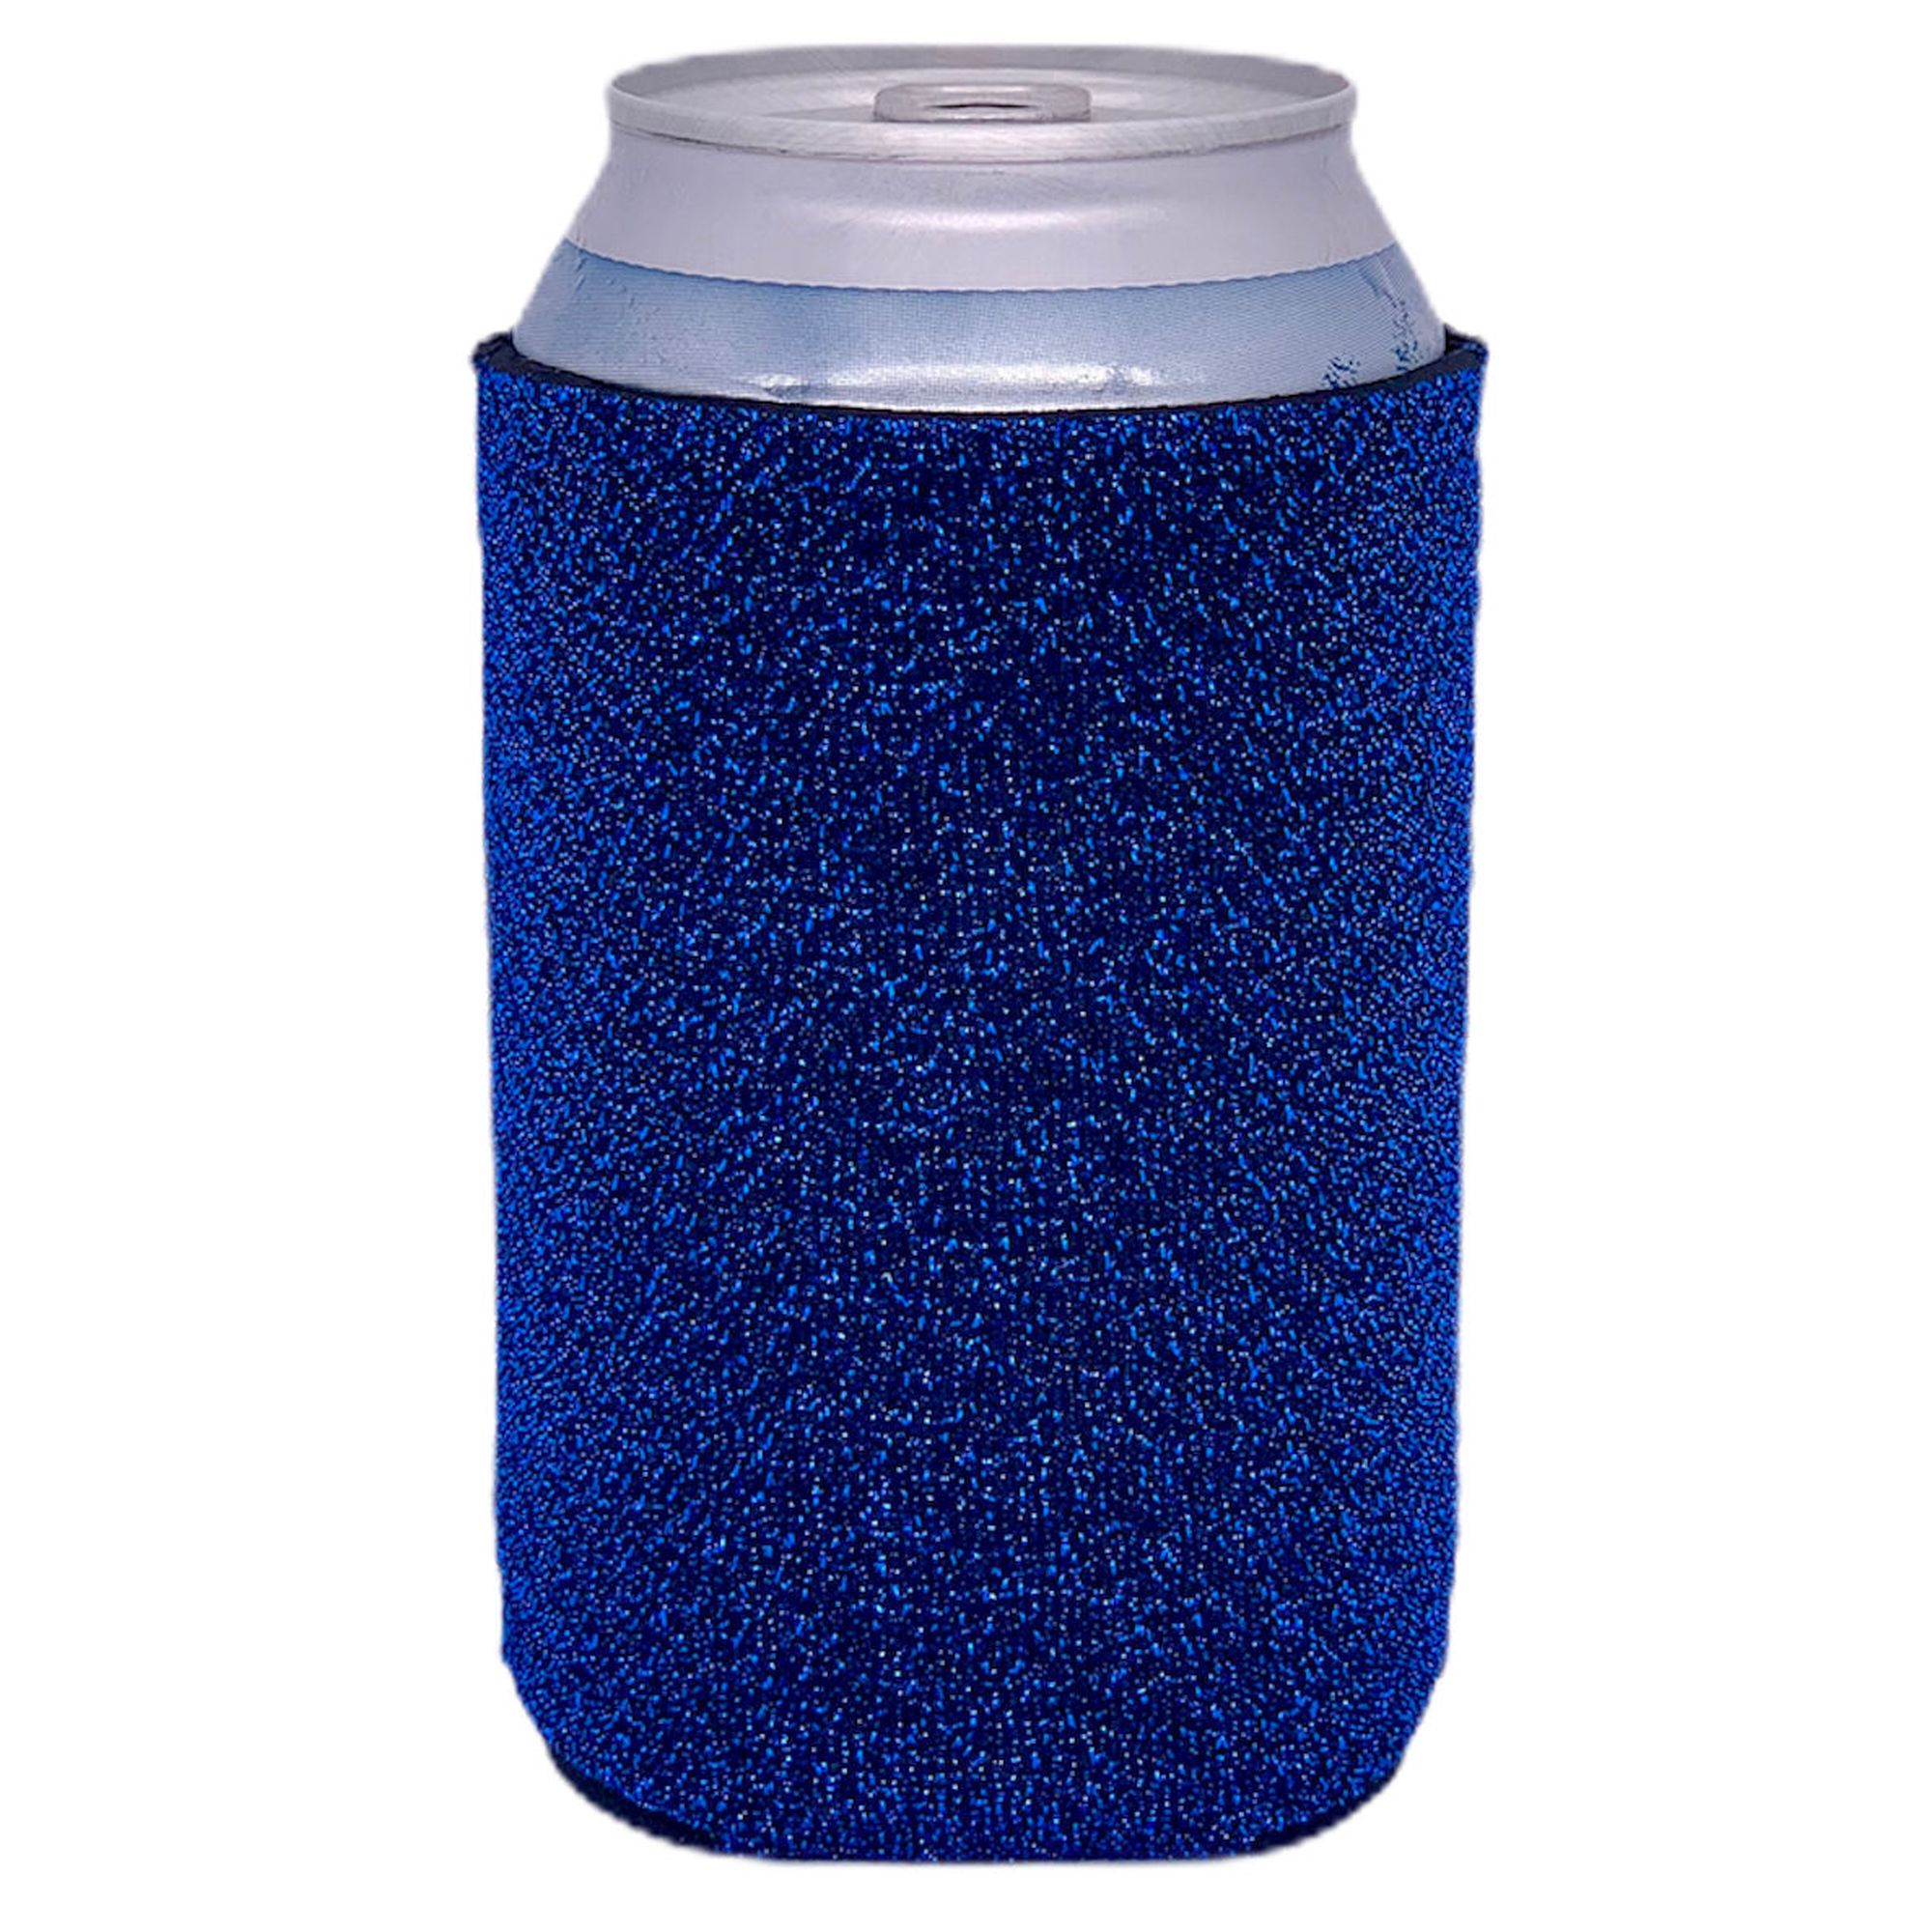 Protective Glitter Silicone Boot, Compatible With Tumbler 20-40oz